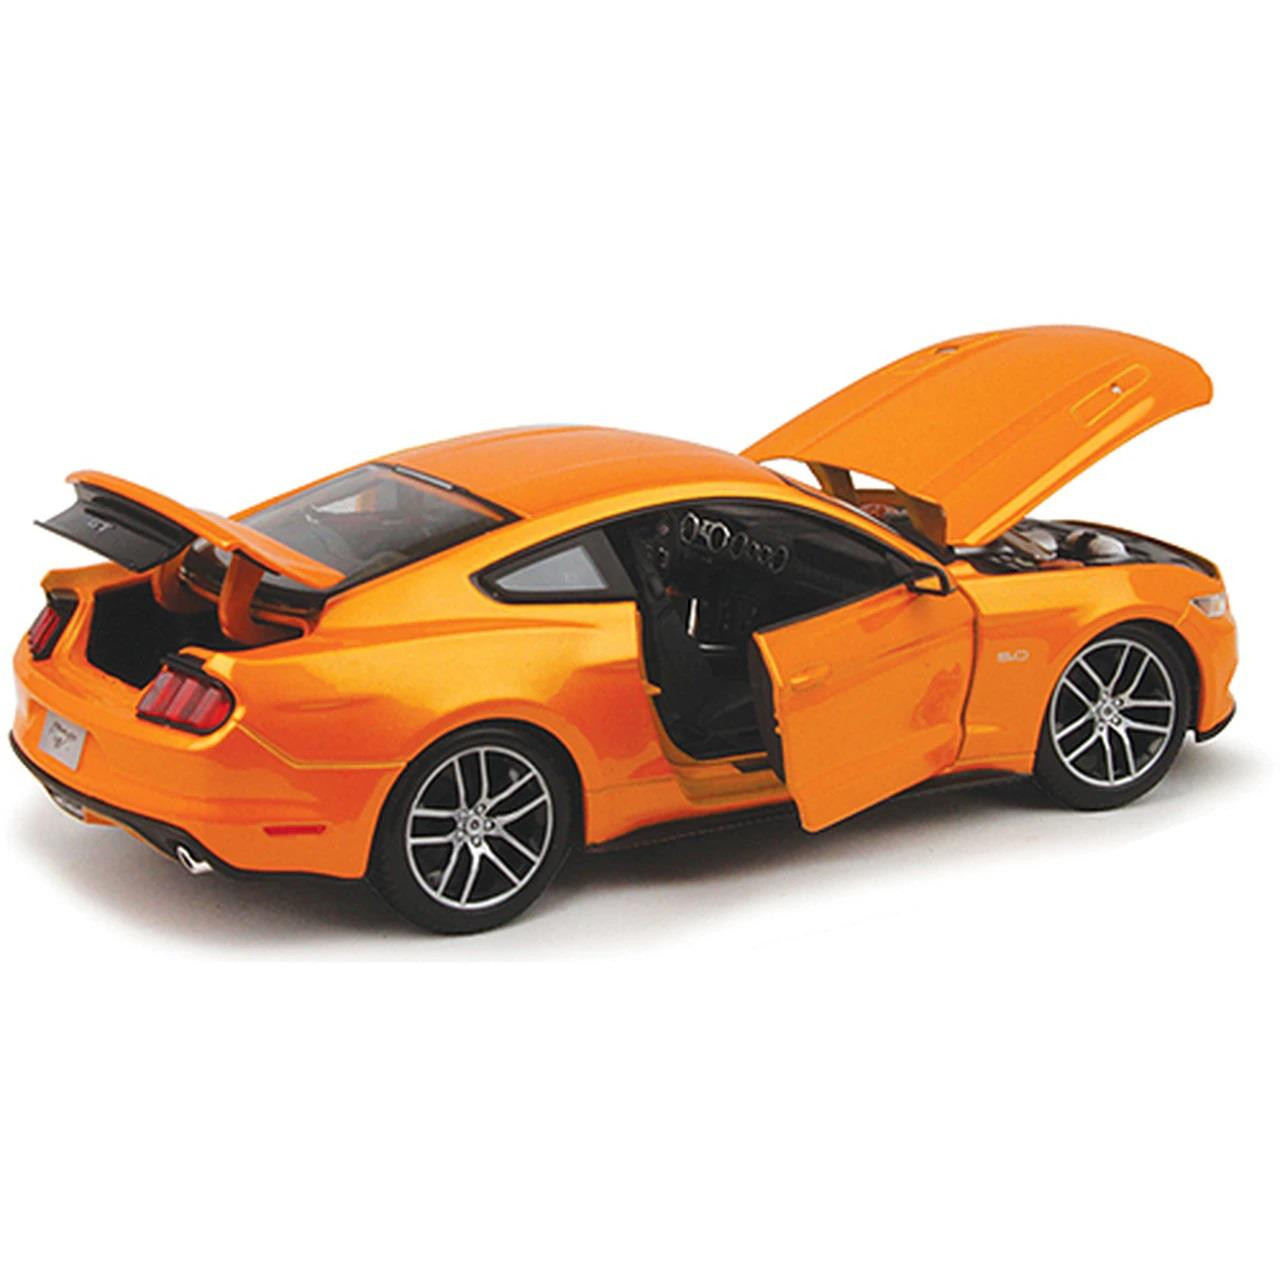 Maisto Scale Model Compatible with Ford Mustang GT 2015 Orange 1:18  MI31197OR